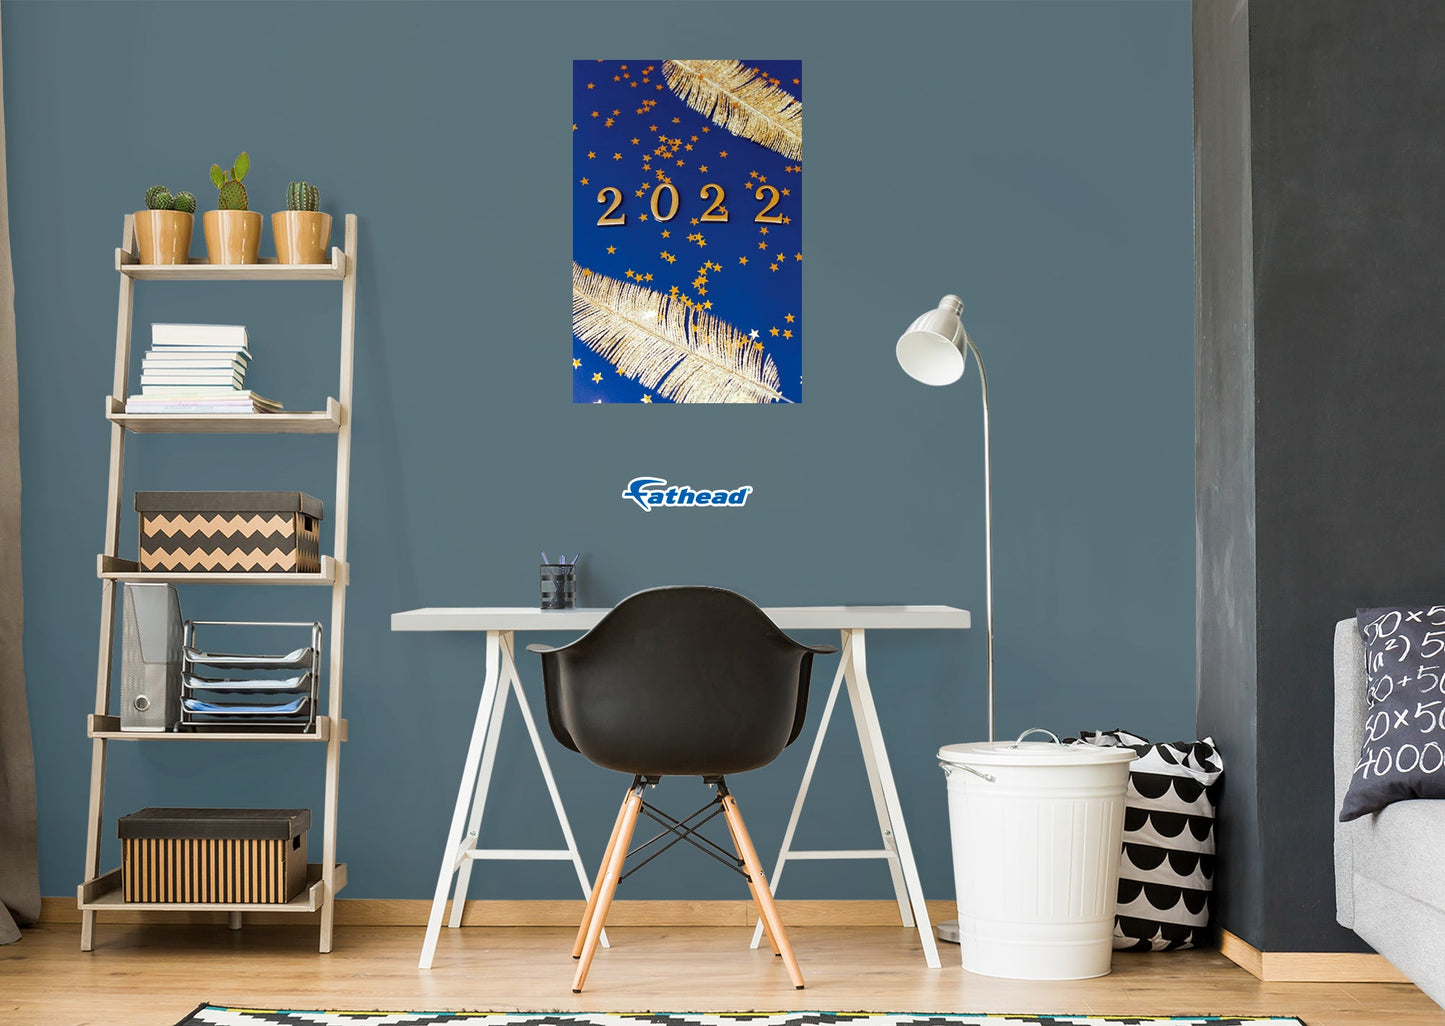 New Year: Golden Feathers Poster - Removable Adhesive Decal